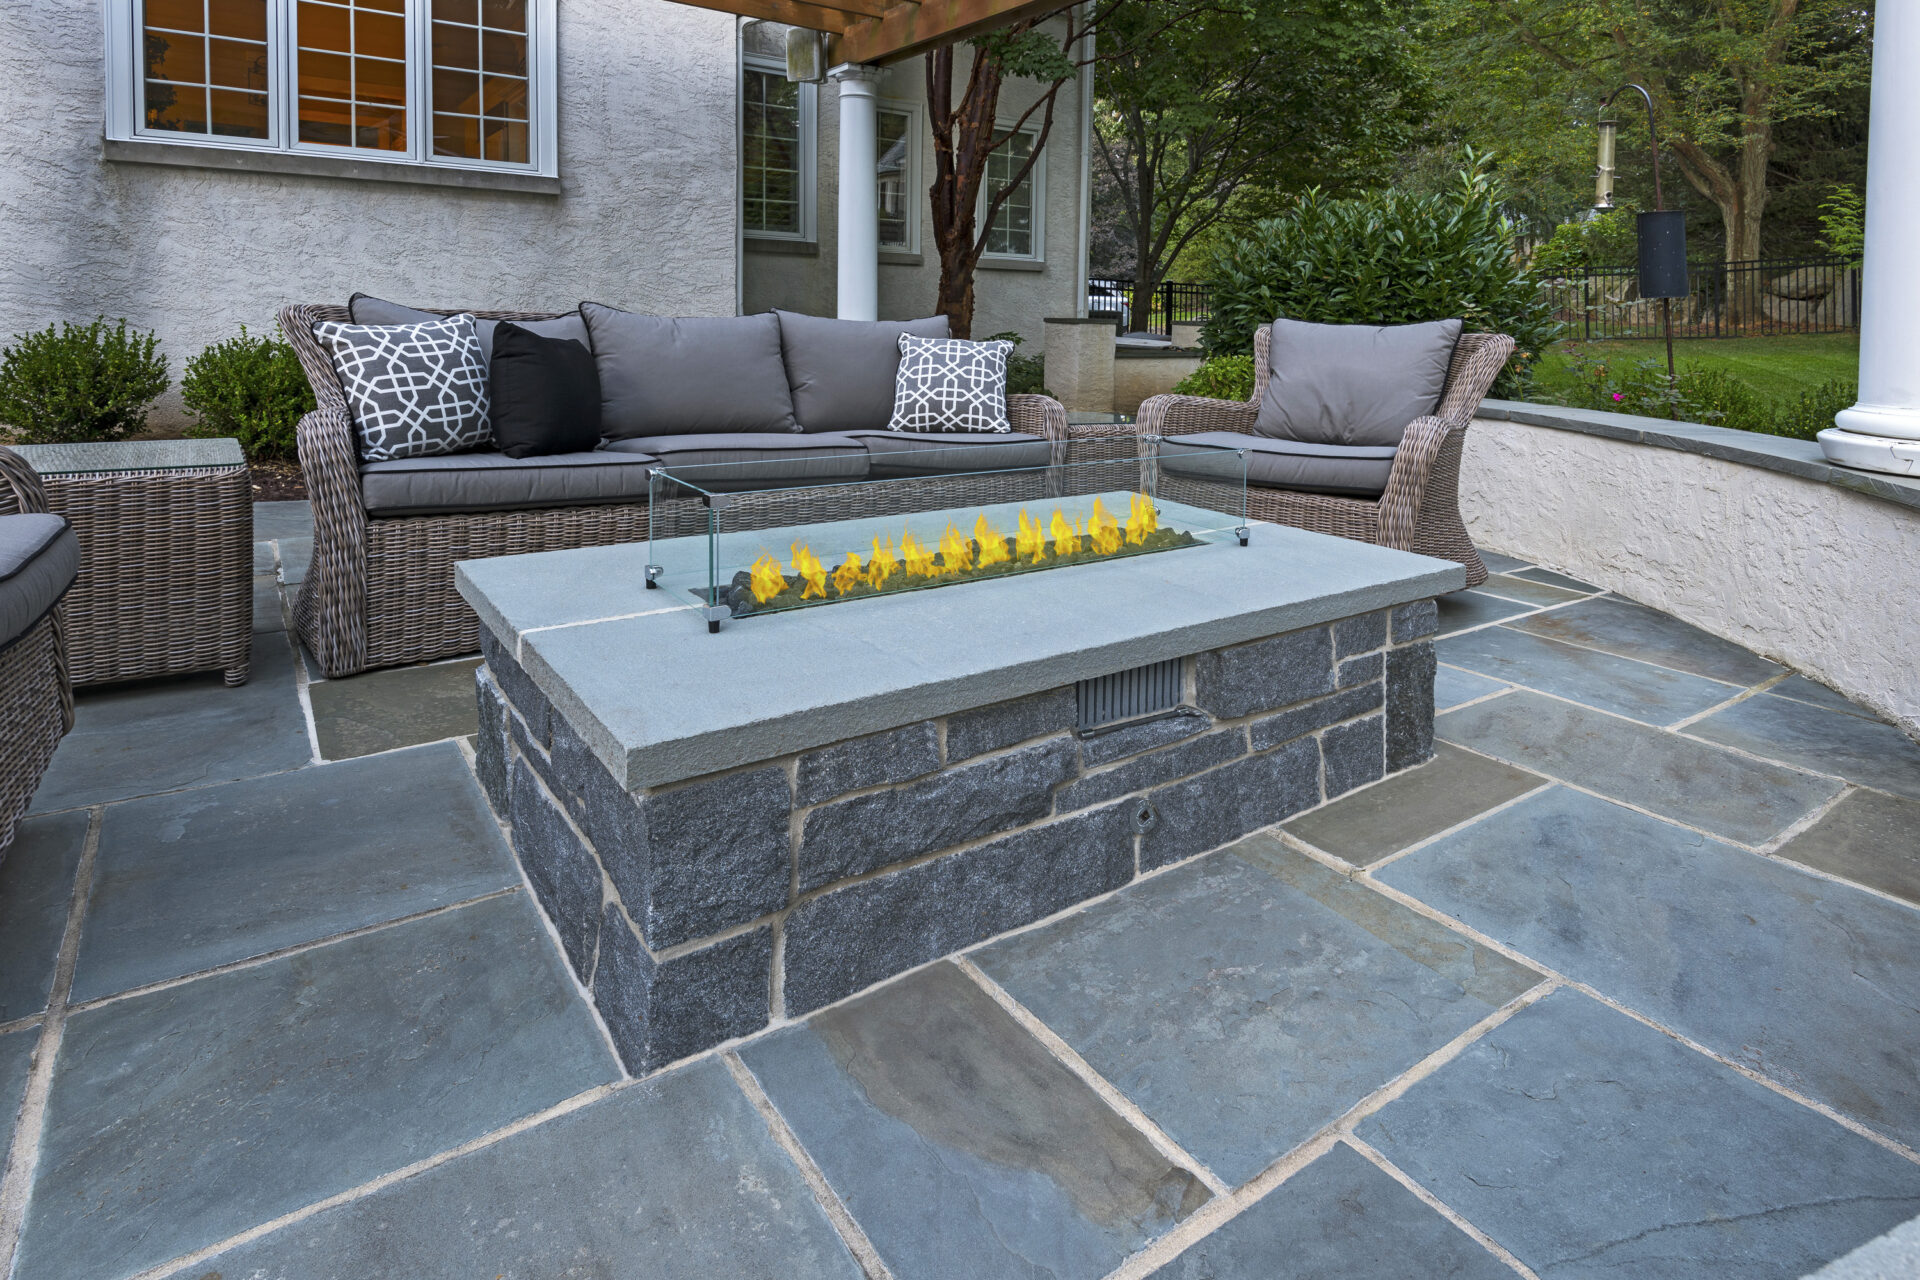 7 Great Ideas for Creating a Beautiful Outdoor Living Area